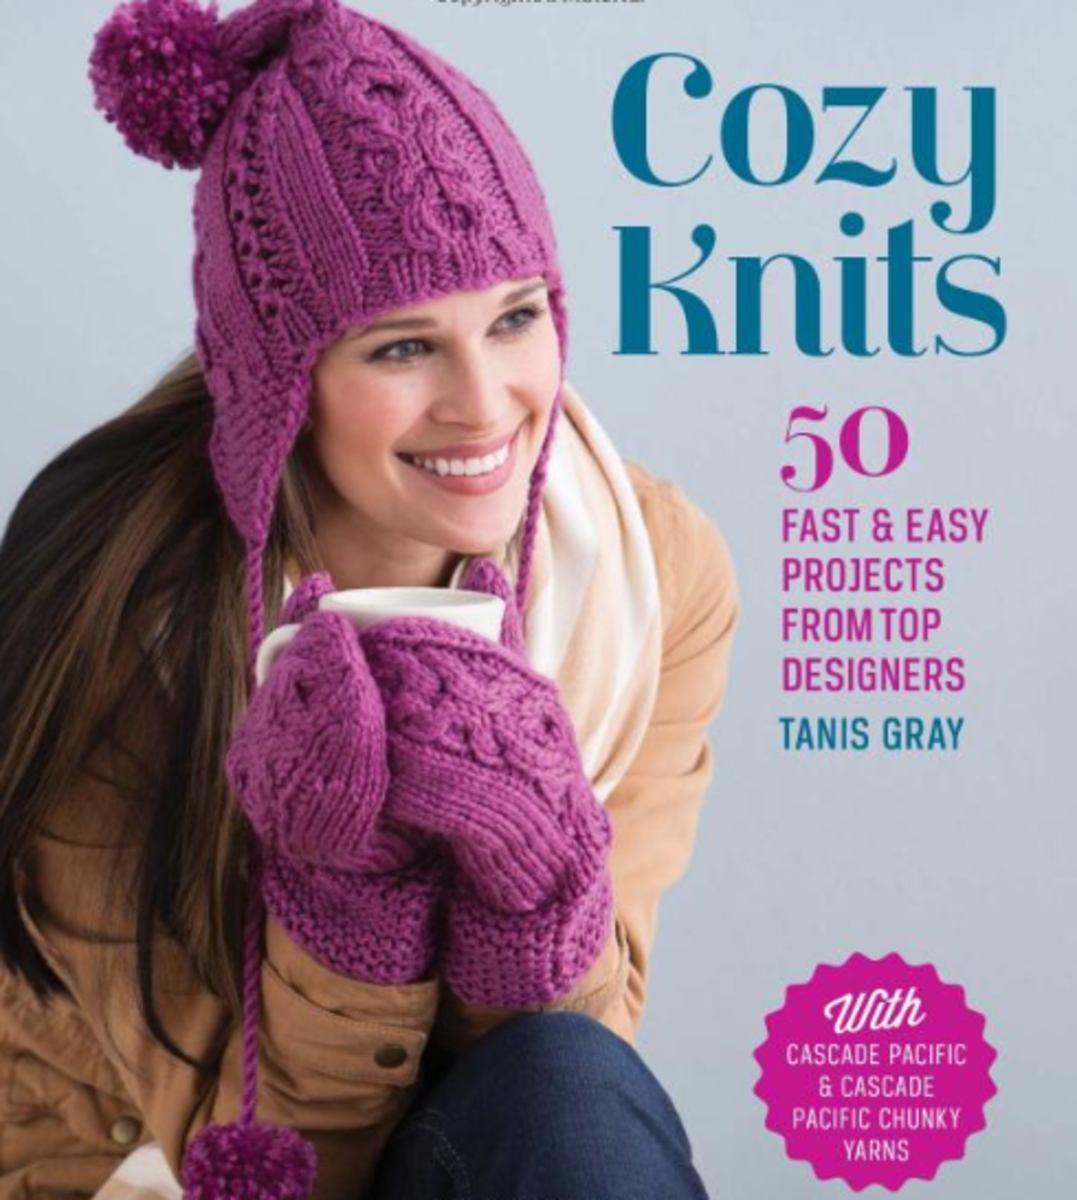 Cozy Knits: 50 Fast & Easy Projects from Top Designers, books